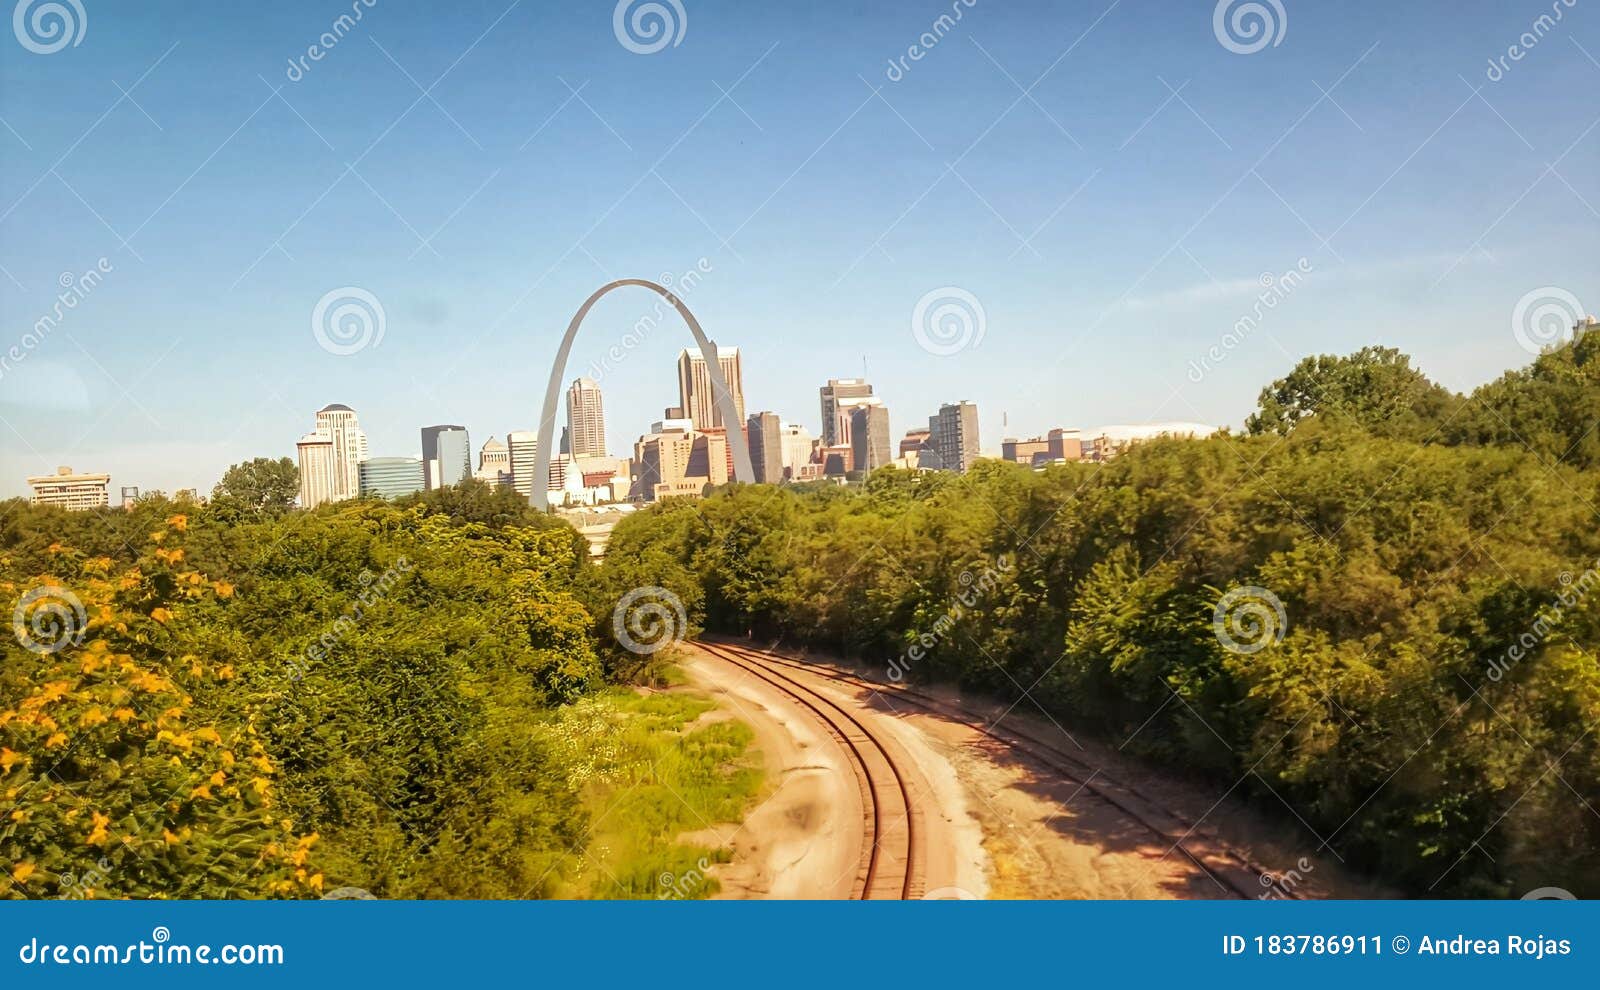 Beautiful View Of St. Louis From The Train Going From St. Louis To Chicago In USA Stock Image ...